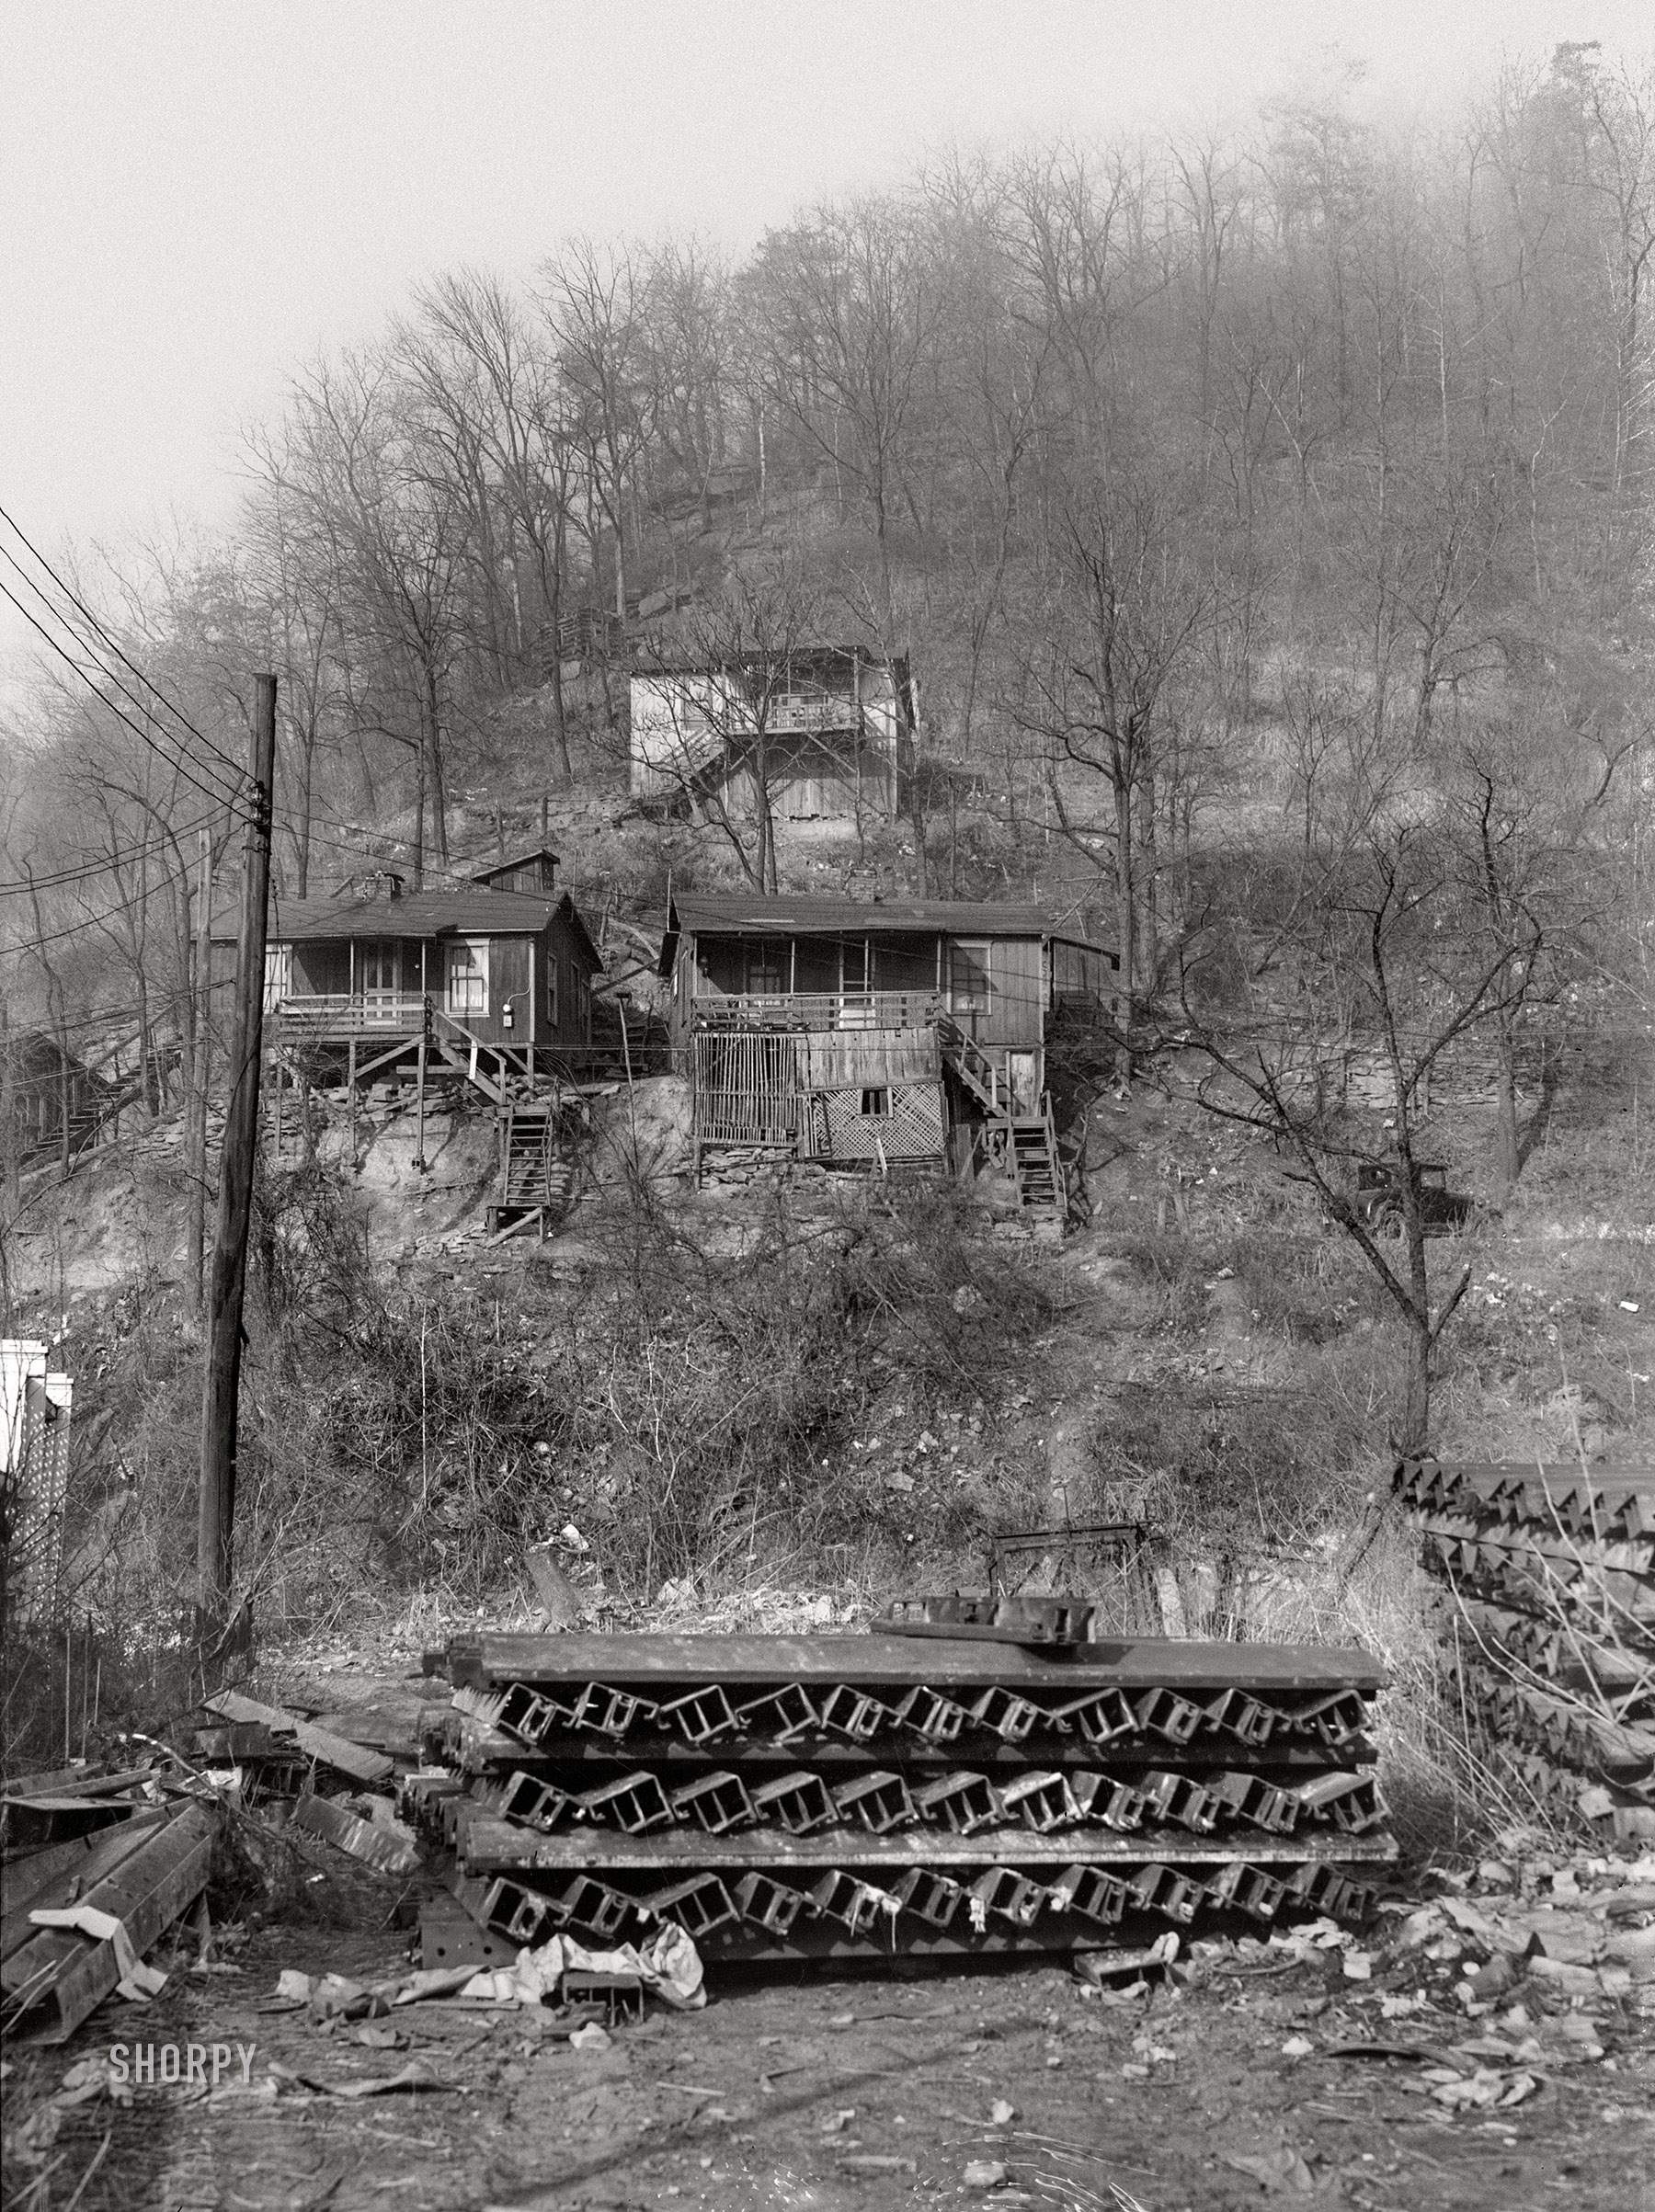 January 1939. "Houses at city limits. Charleston, West Virginia." Nitrate negative by Arthur Rothstein for the Farm Security Administration. View full size.